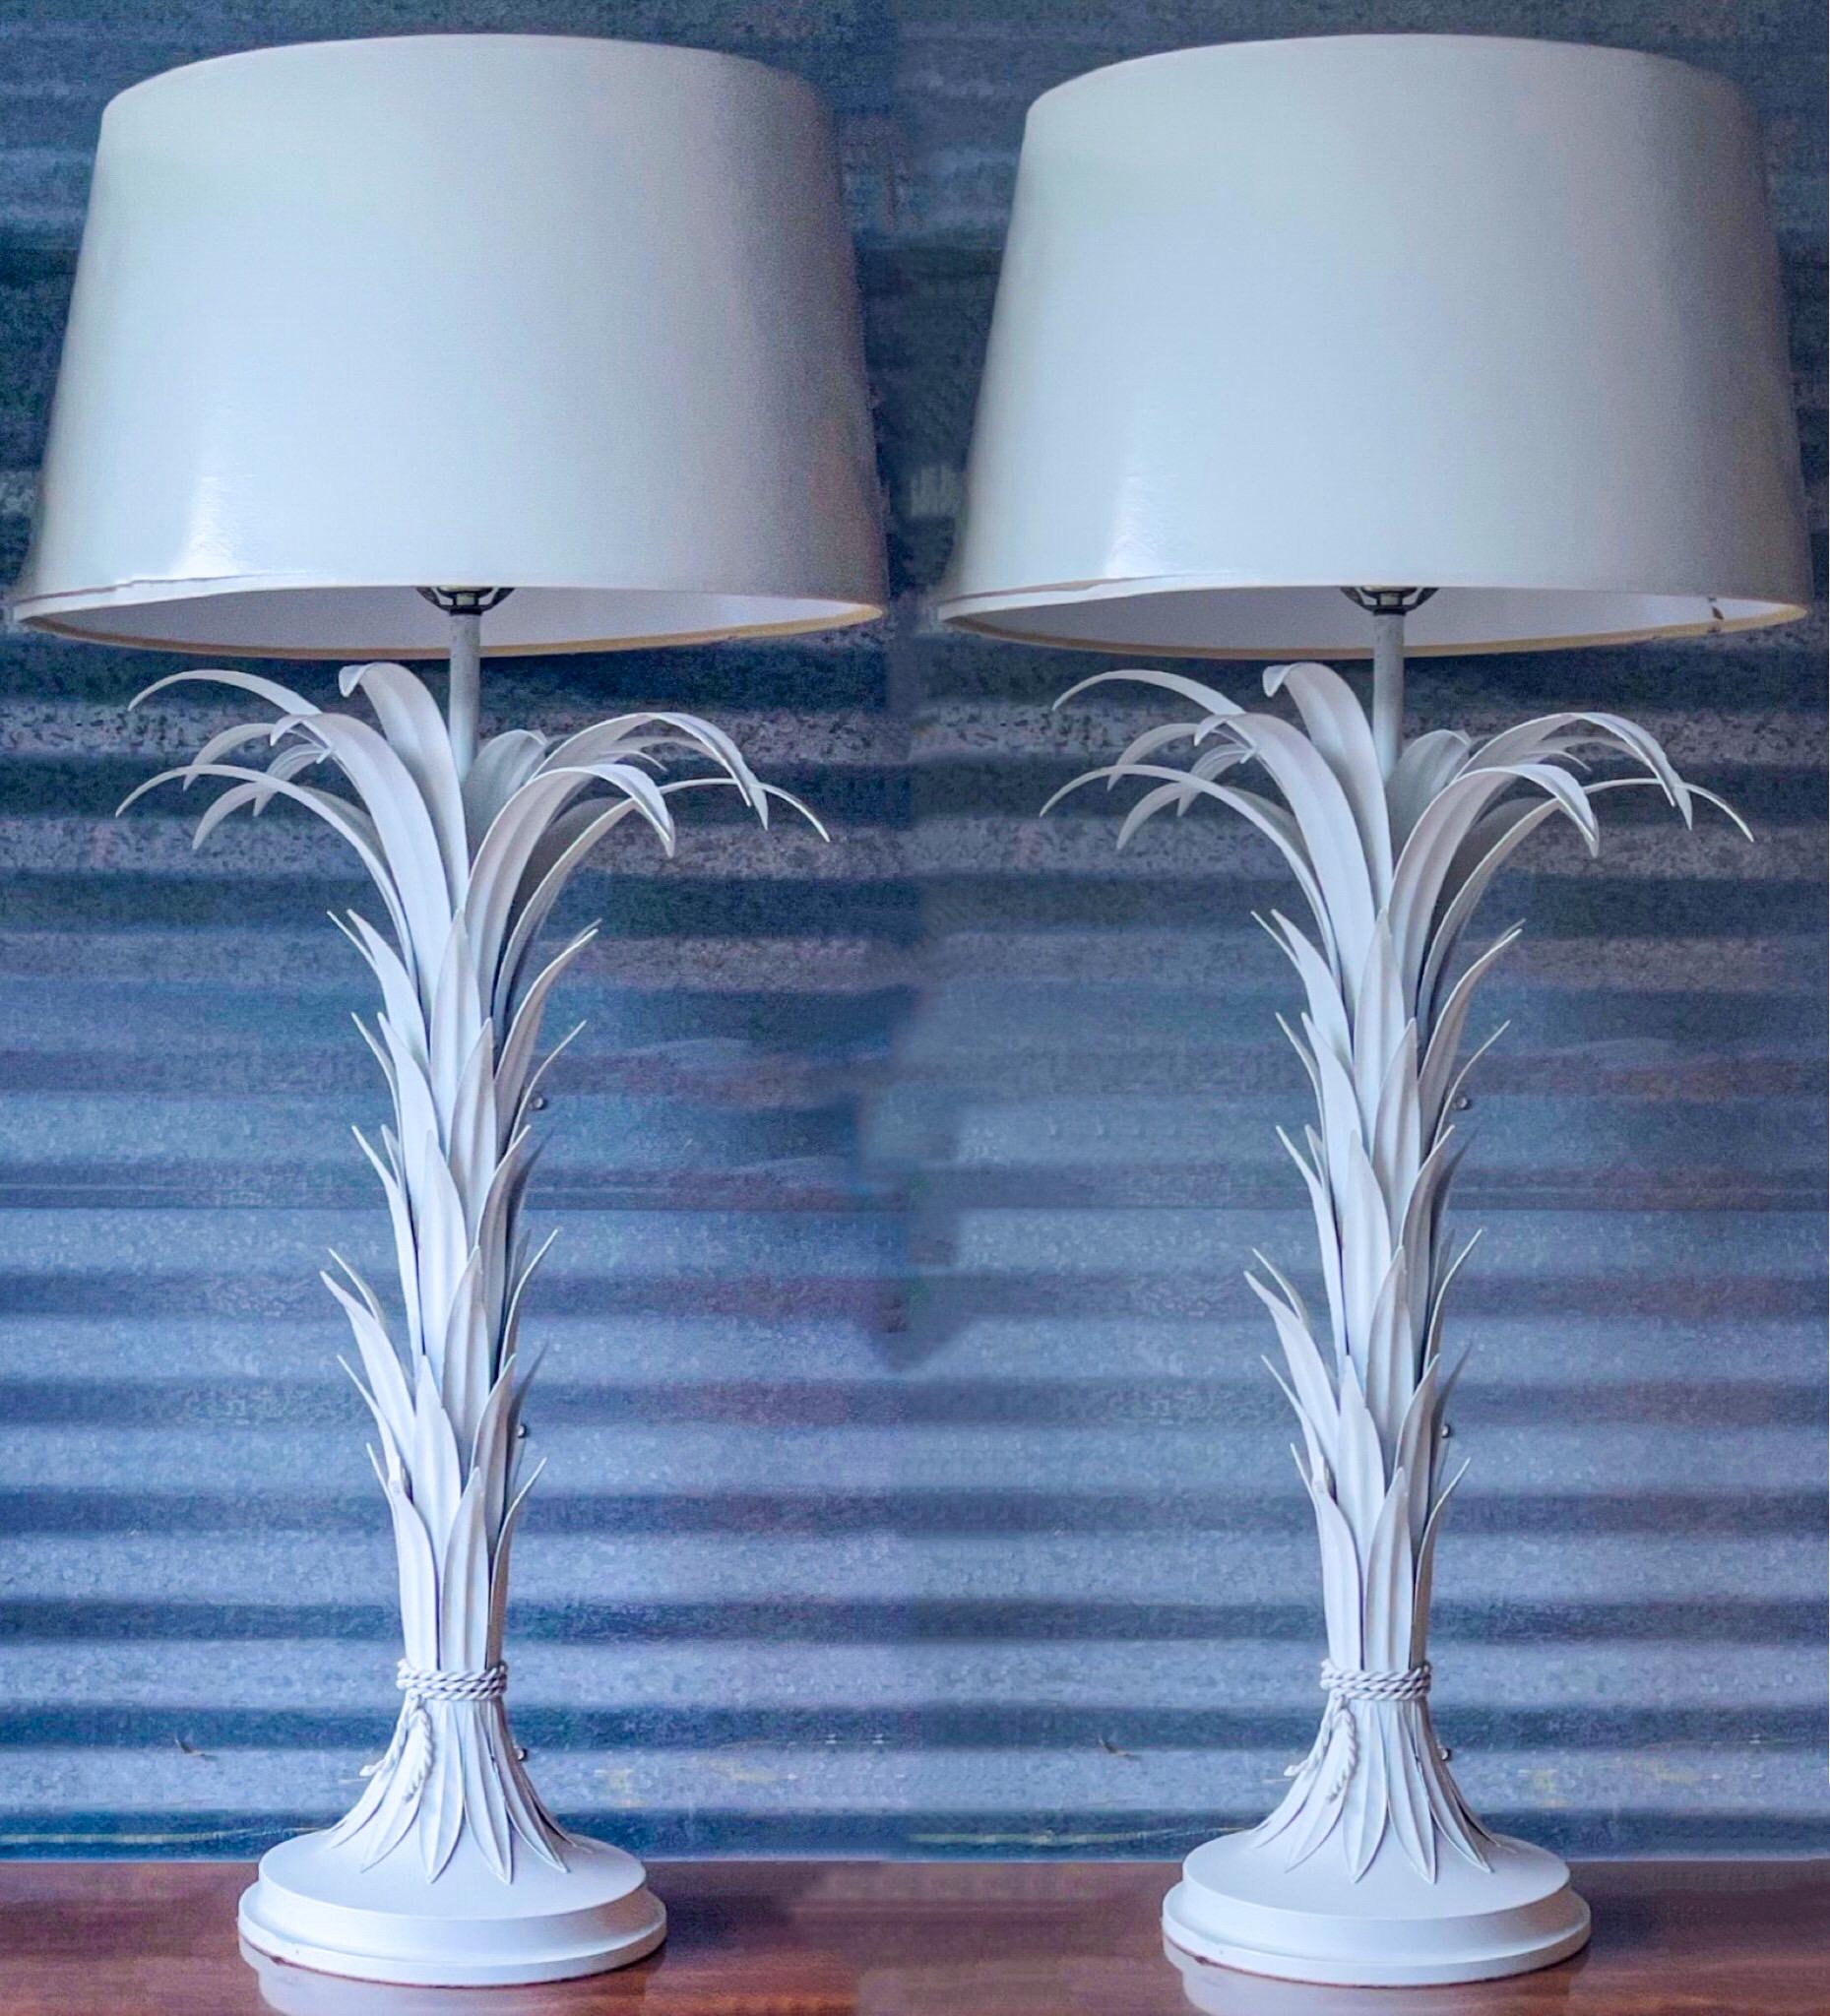 This is a pair of mid-century Italian Serge Roche inspired white tole palm lamps. They have a great look! The shades,however, are in very poor shape. I won’t include them unless requested. Base is 9” in diameter. They are unmarked.